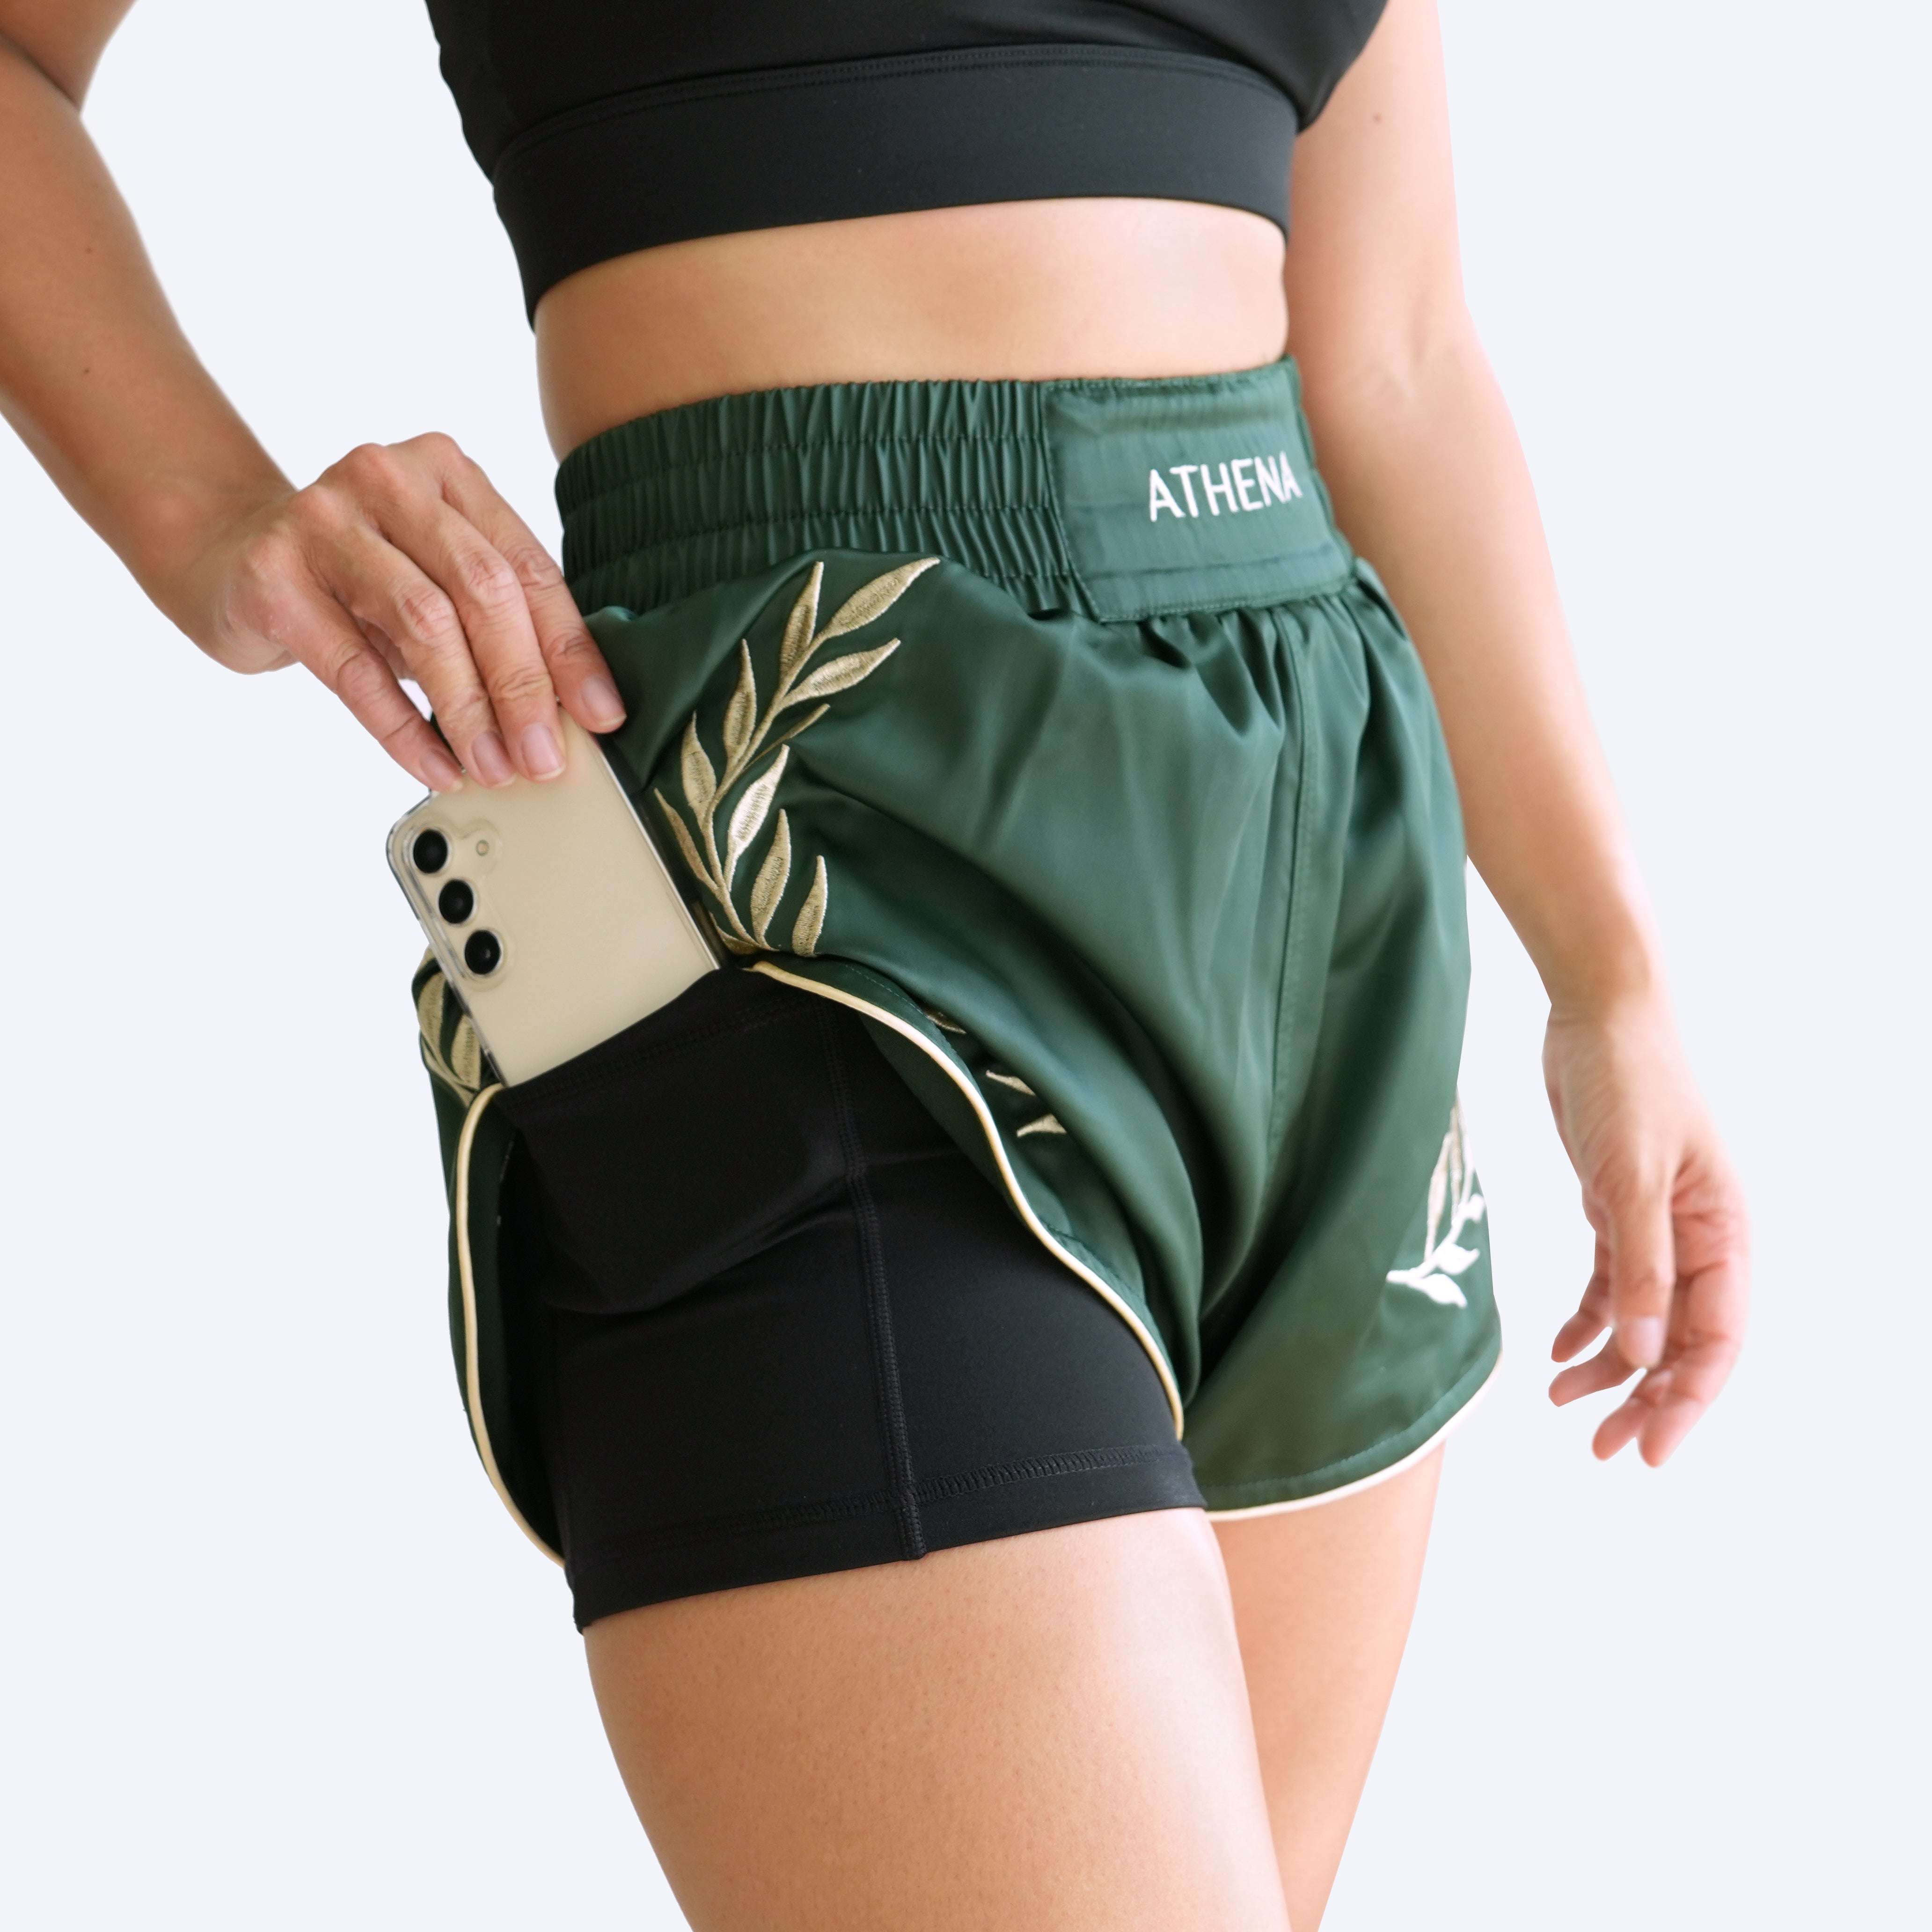 Athena Fightwear women's muay thai shorts dark green with wide hips and built-in safety shorts with anti camel toe and pockets